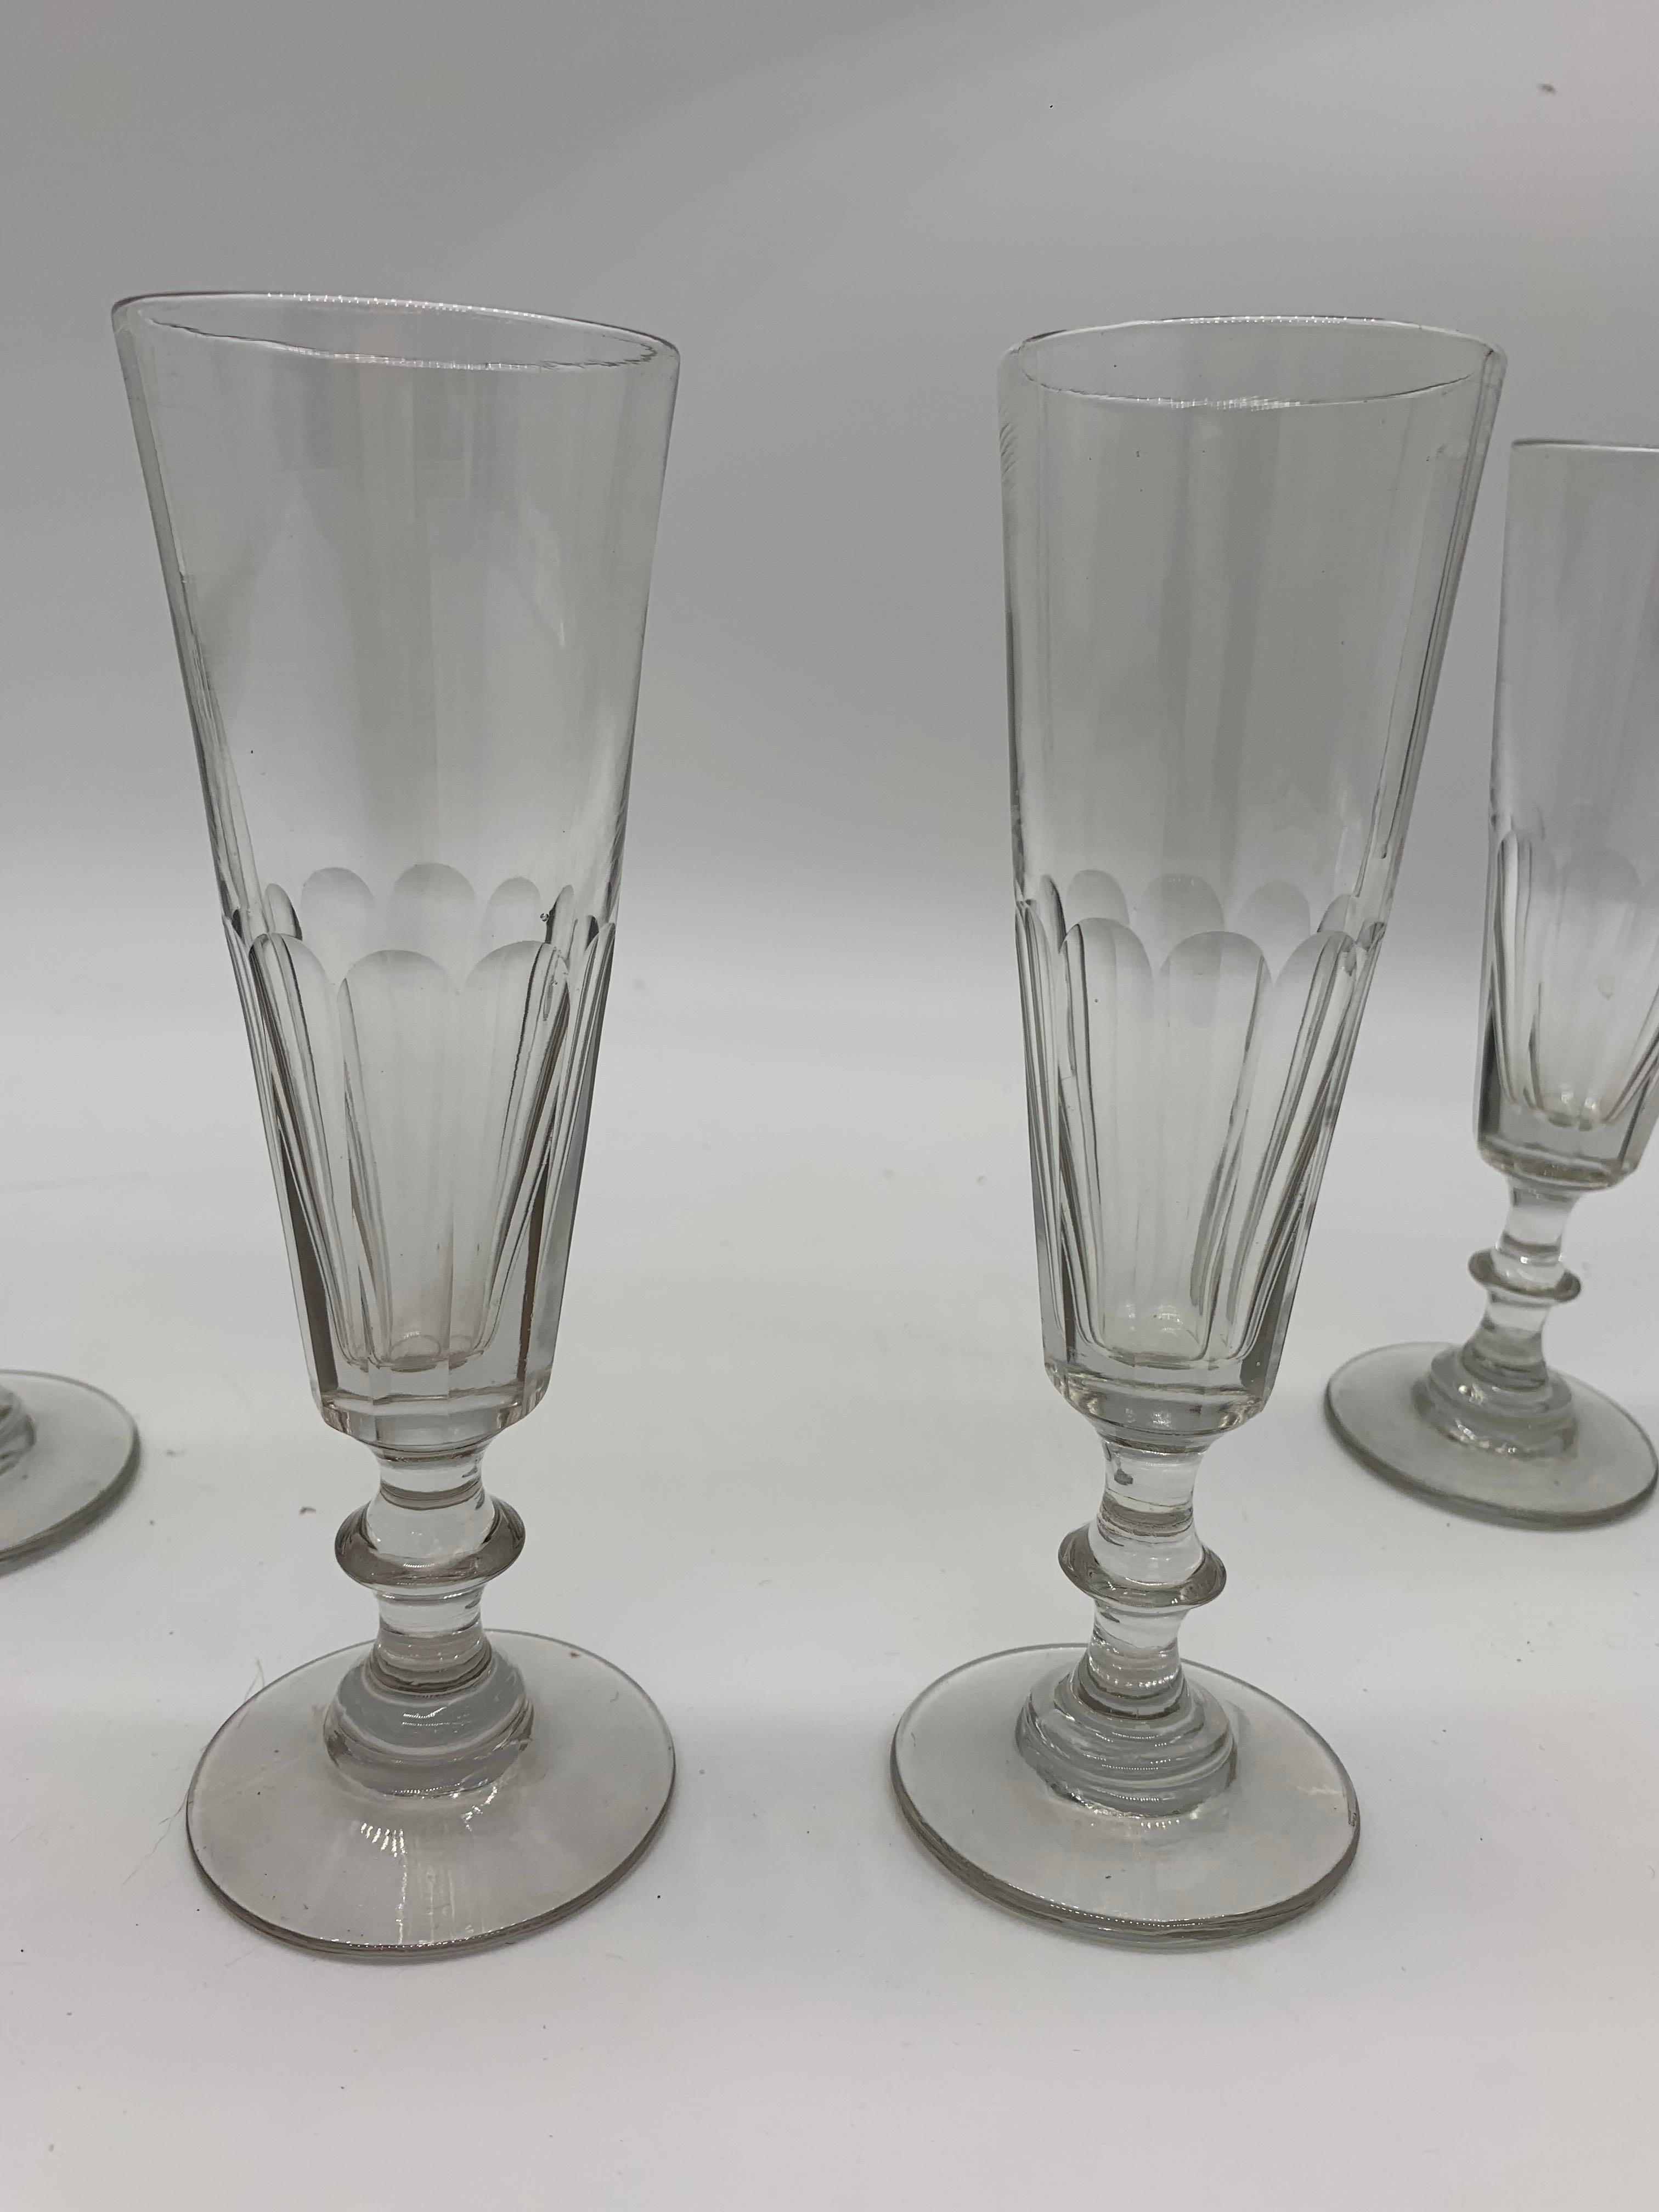 These are four 1860 Frech Chrystal champagne glasses.
Beautiful and elegant.